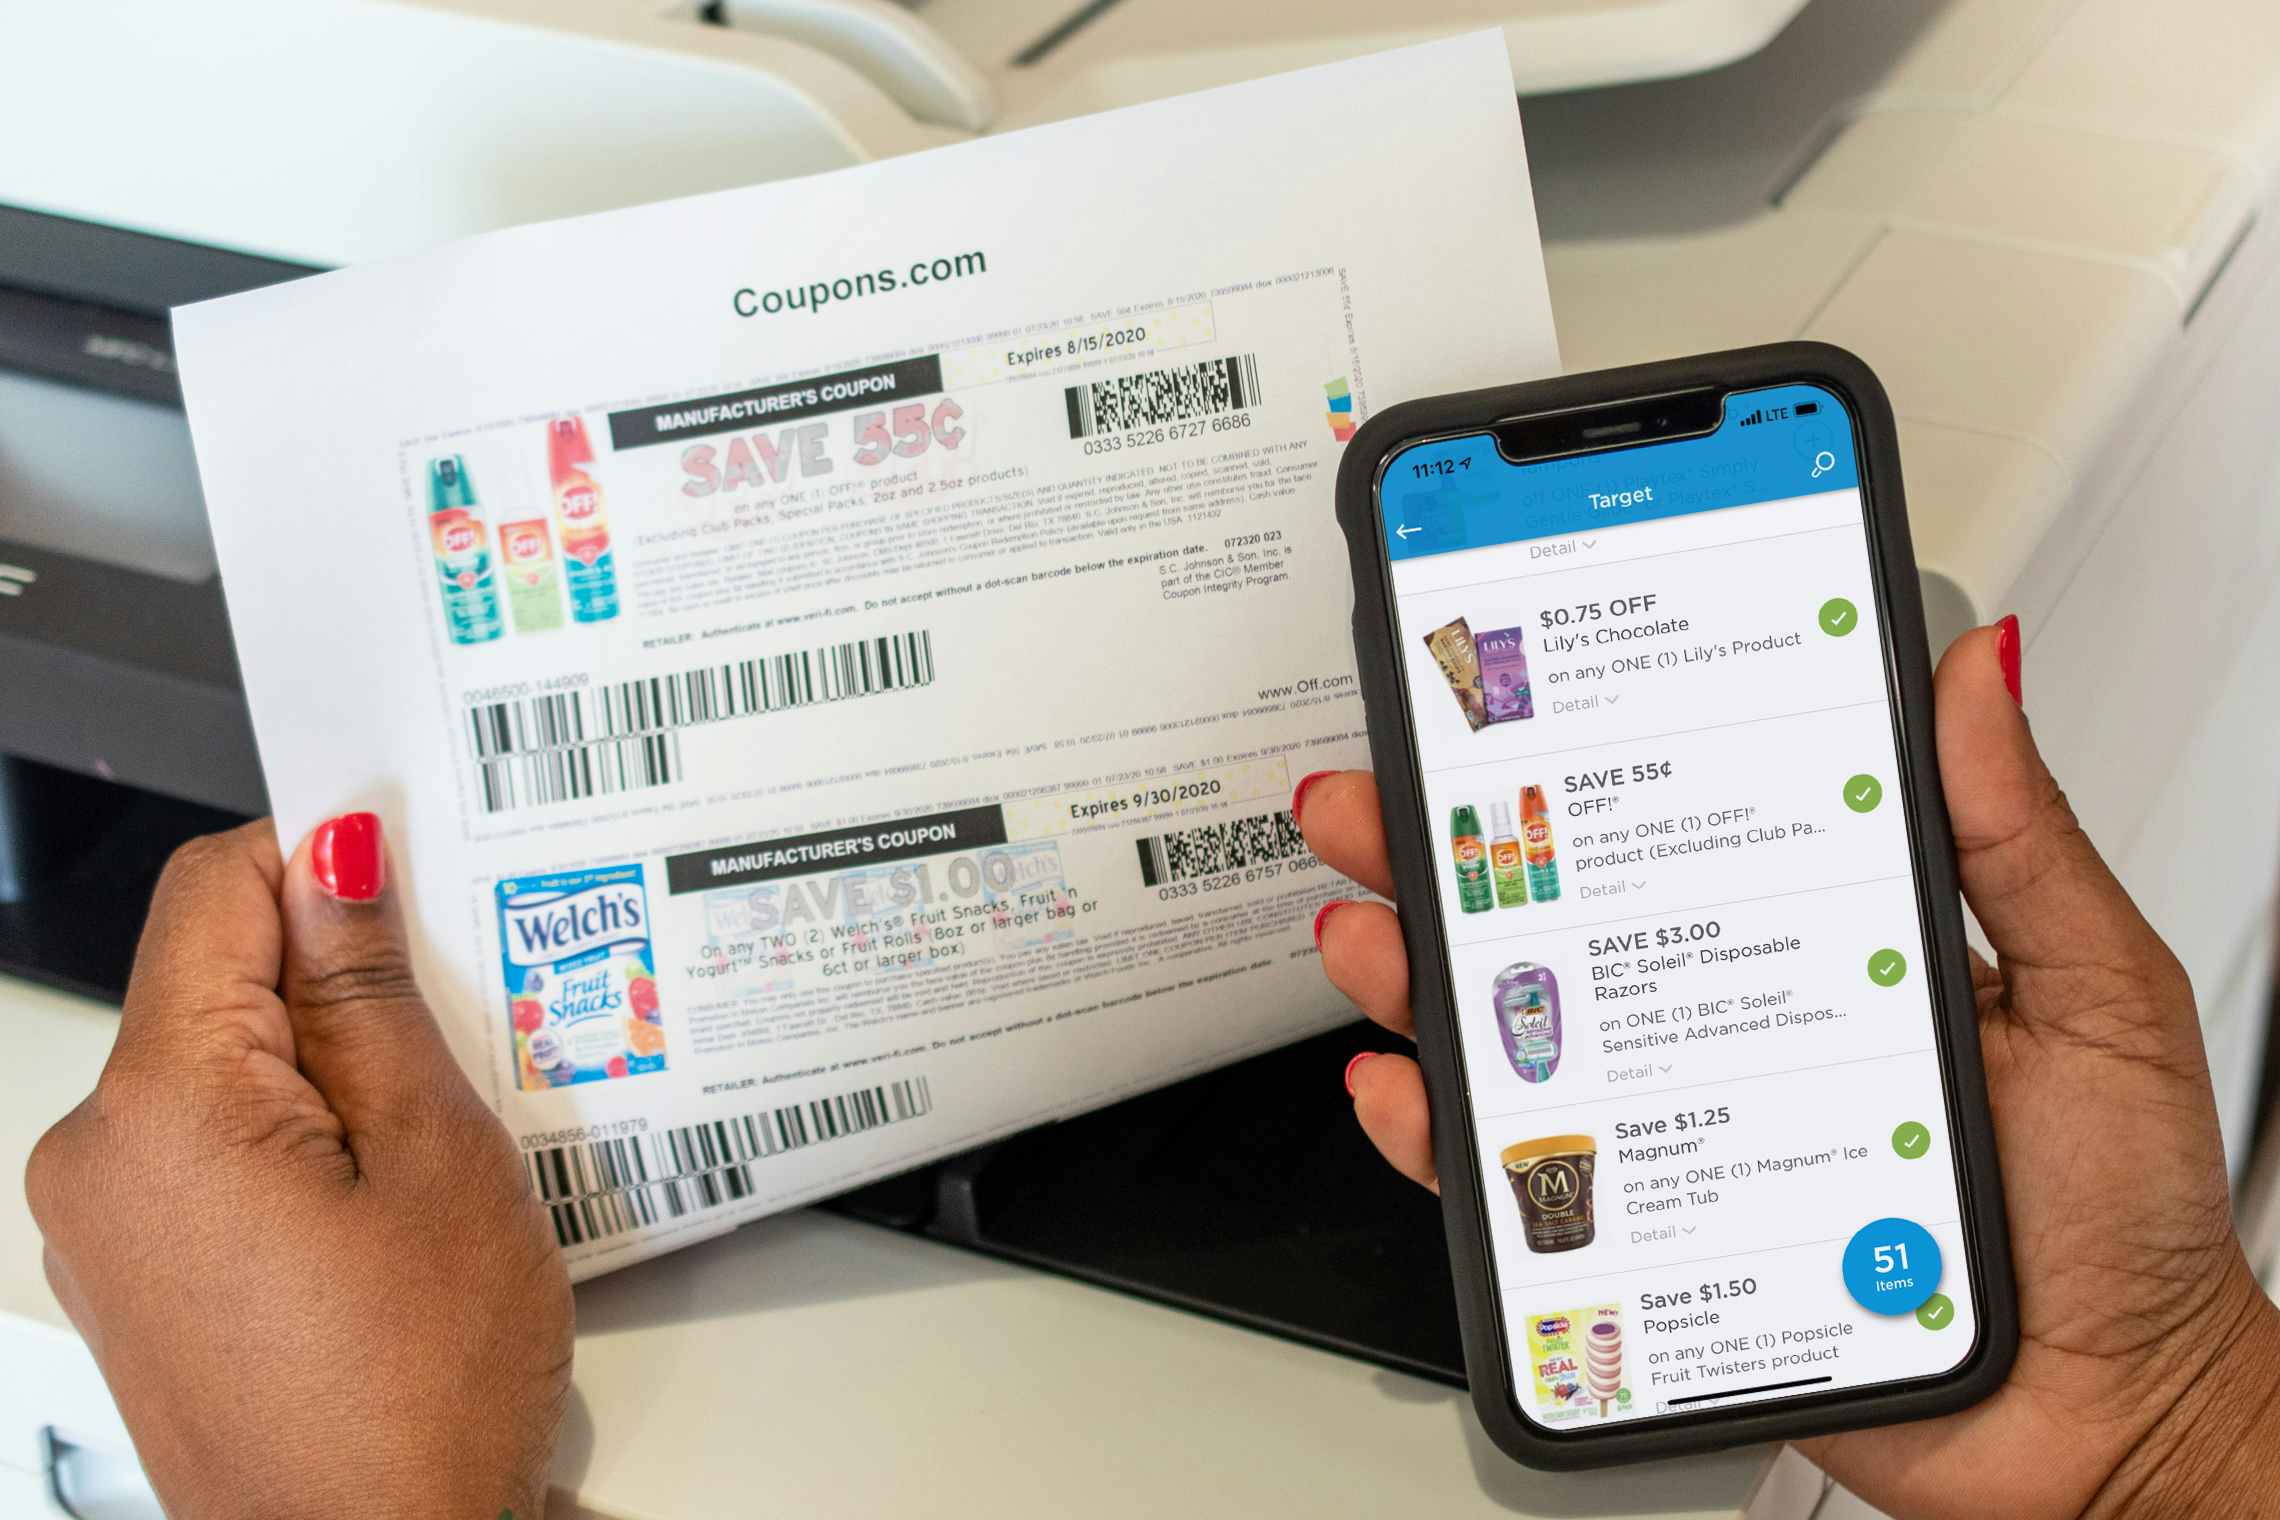 A person holding a cell phone displaying the coupons.com app and printed coupons in front of a printer.